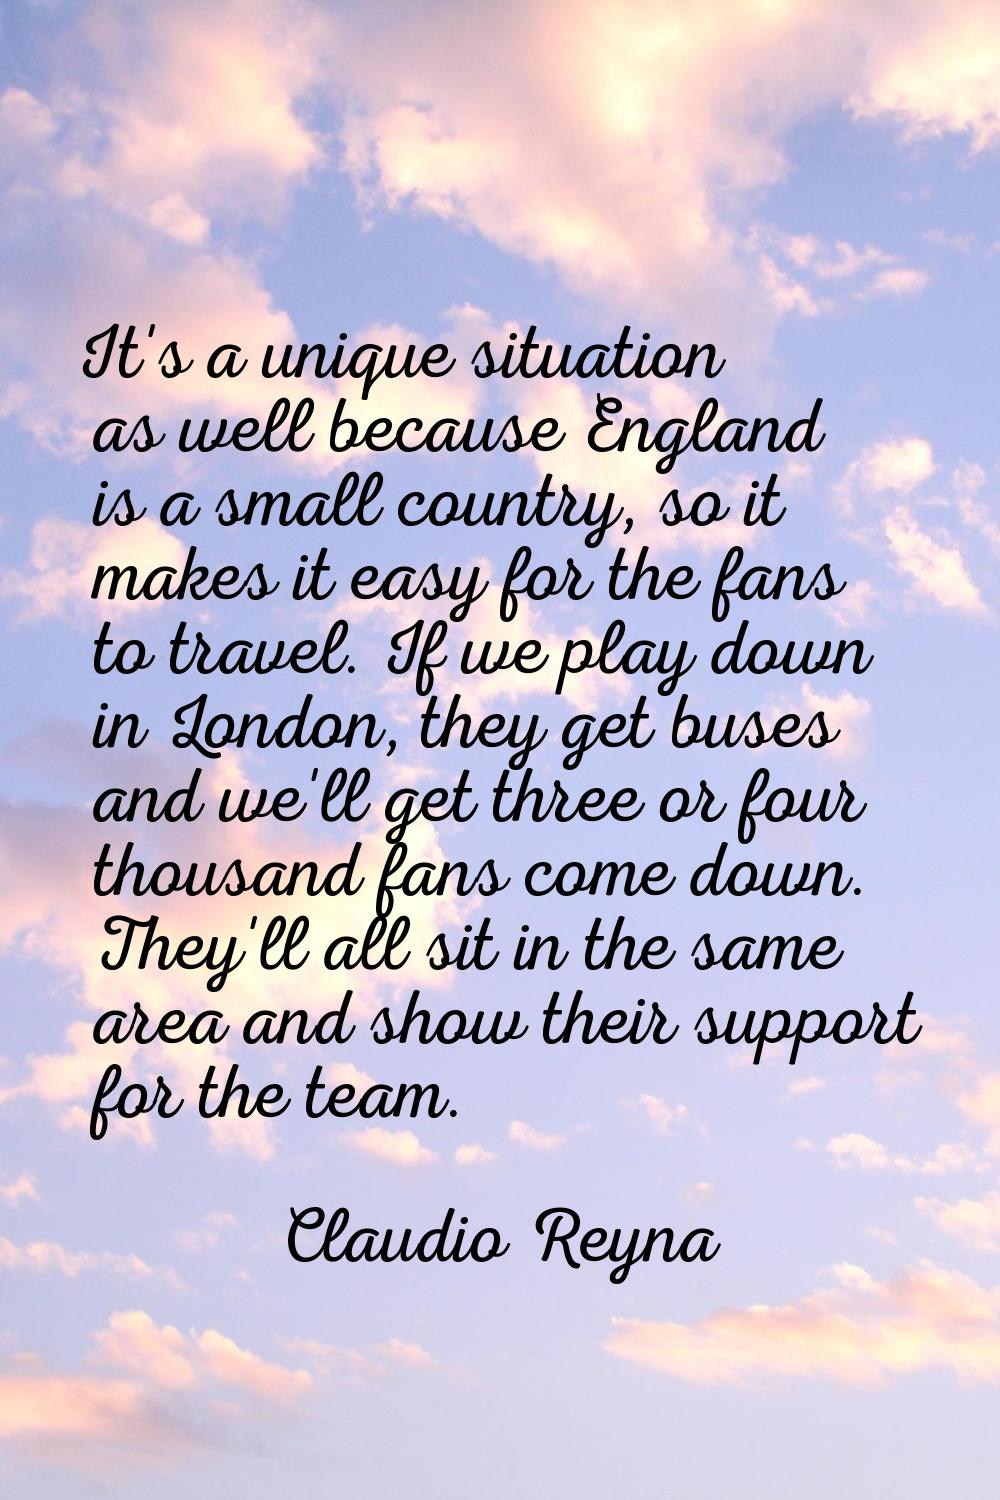 It's a unique situation as well because England is a small country, so it makes it easy for the fan